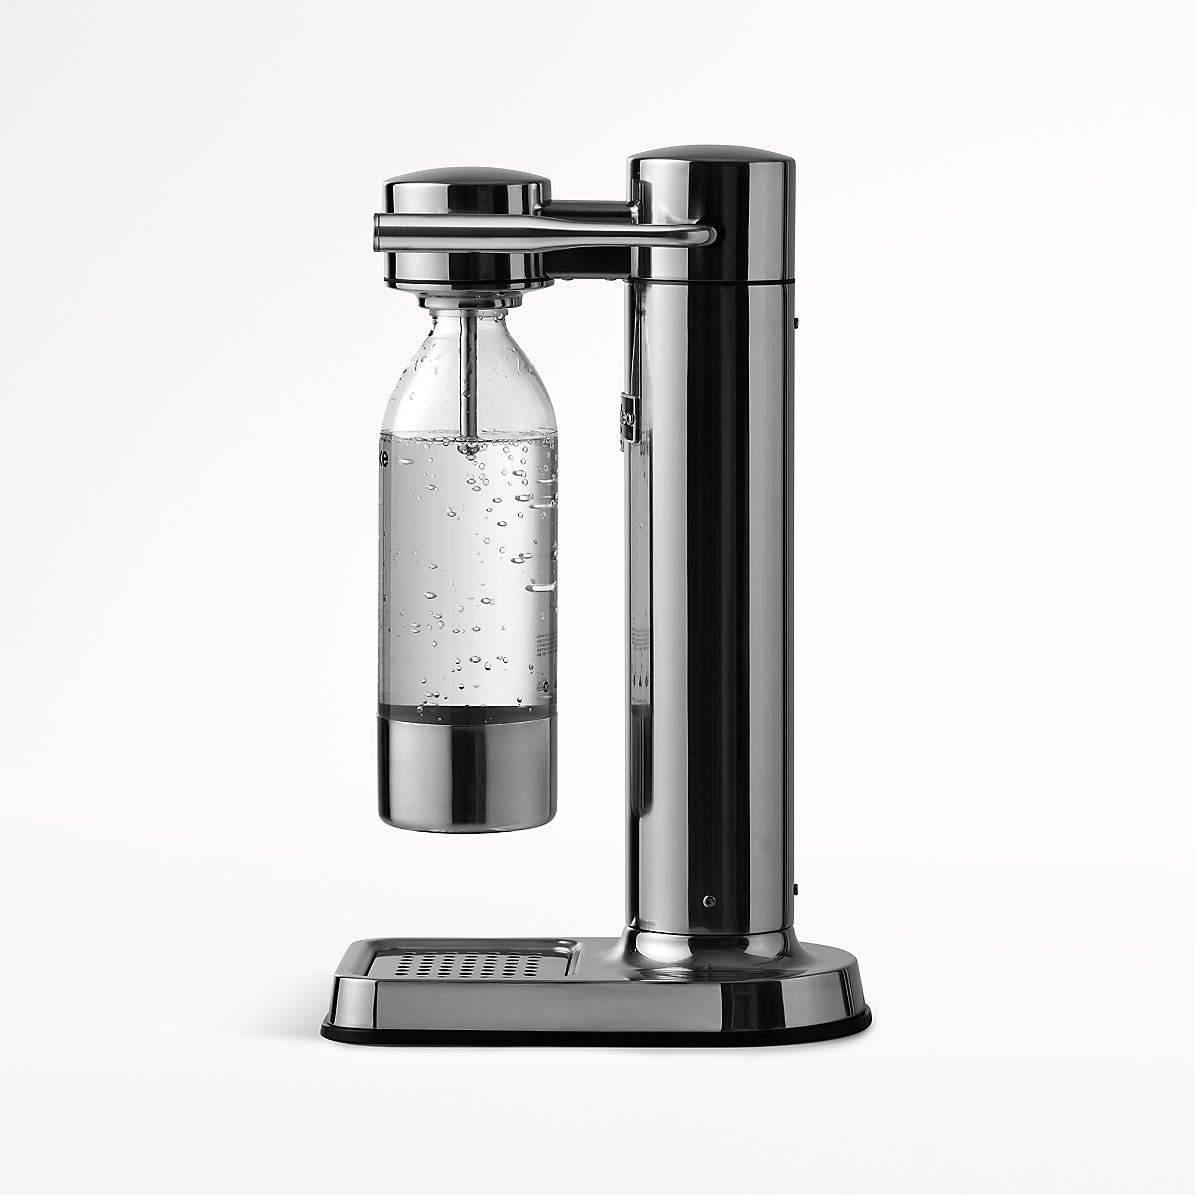 The most beautiful Sparkling Water Maker by Aarke - Our Food Stories